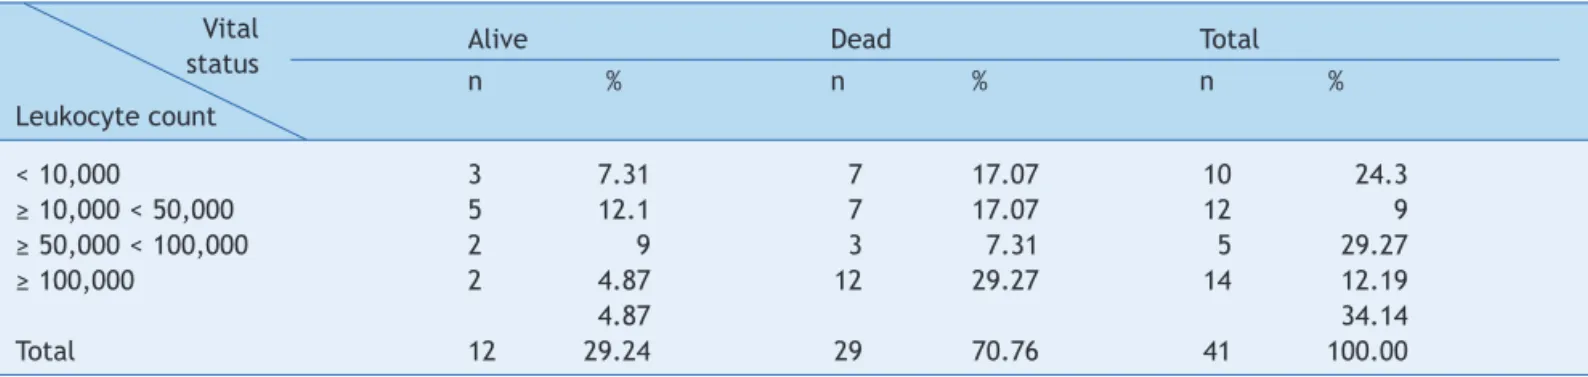 Table 3  Infants with acute lymphoblastic leukemia, according to leukocyte count at diagnosis and vital status as number (n)  and percentage (%).